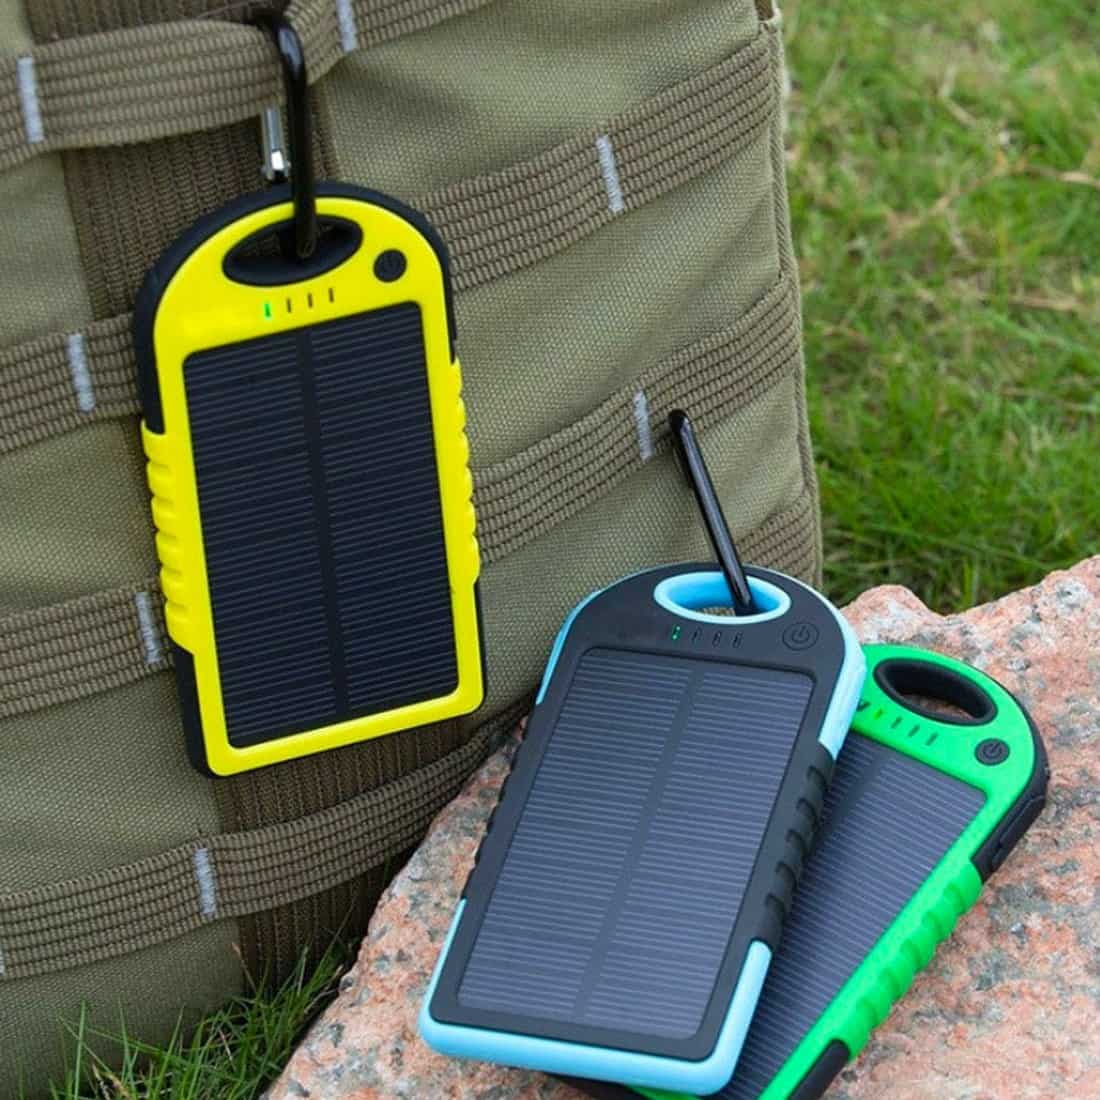 Centechia Waterproof Solar Power Bank Real 12000 mAh Dual USB External Port Polymer Battery Charger with Outdoor Light Lamp